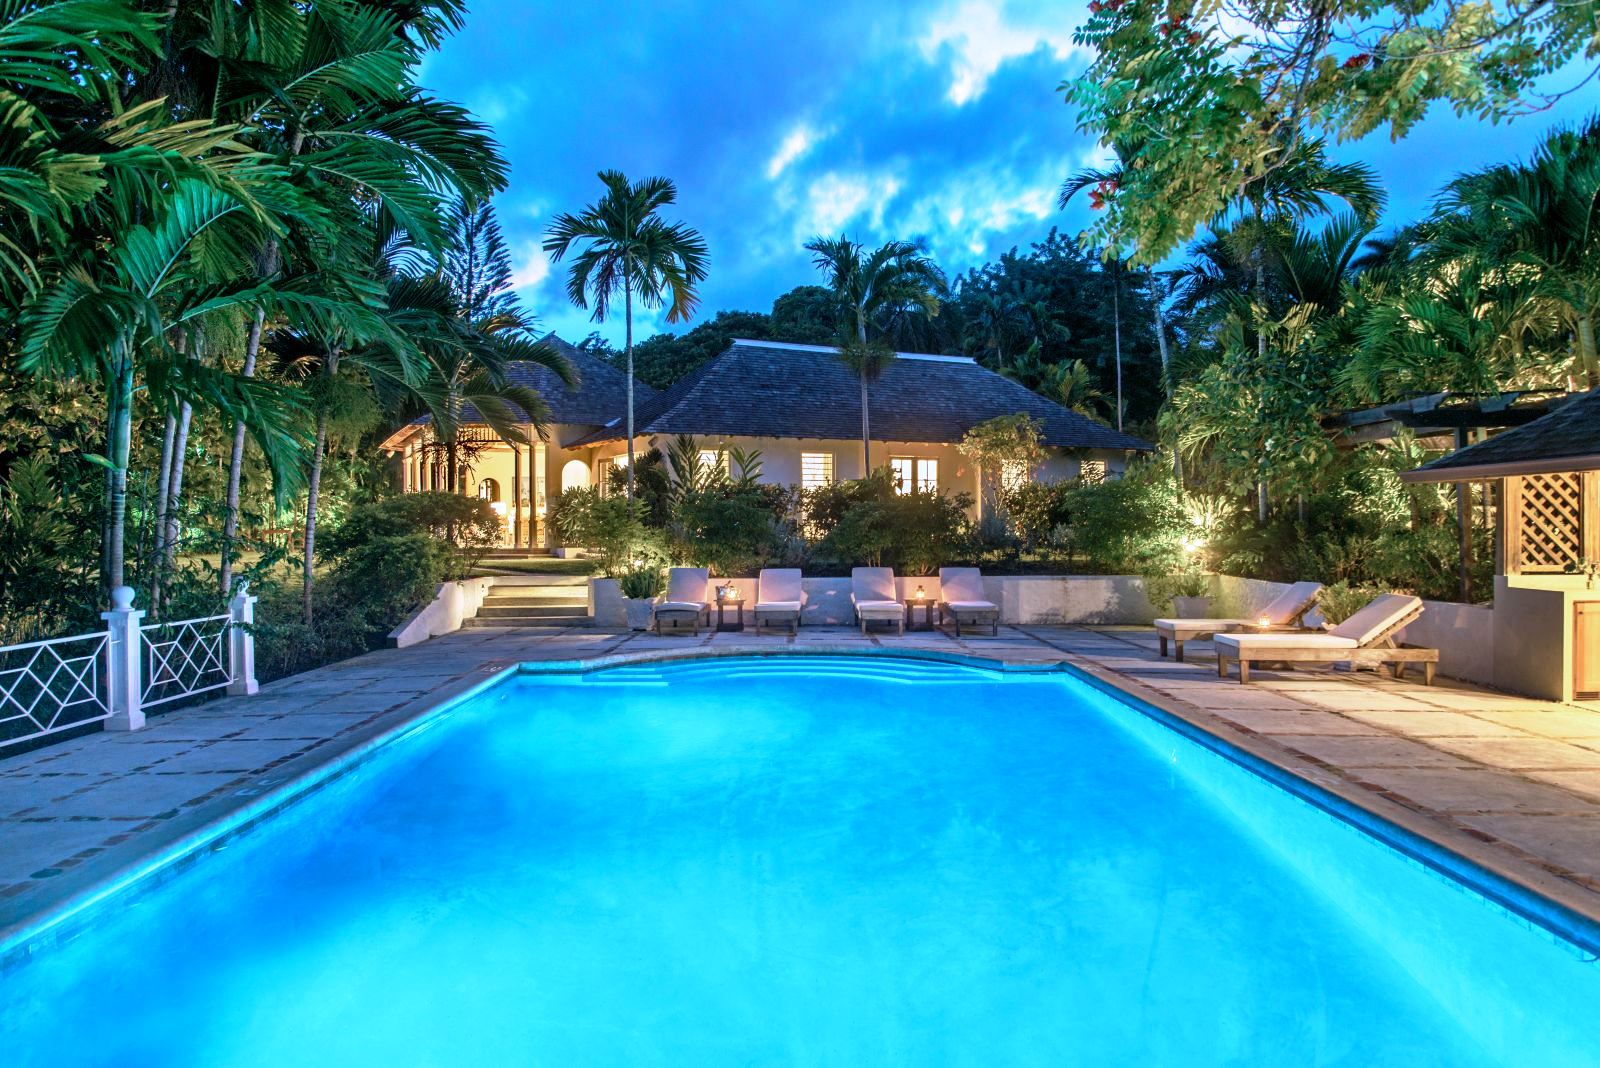 view over the pool to the house at night at Almond Hill Villa, Montego Bay Jamaica